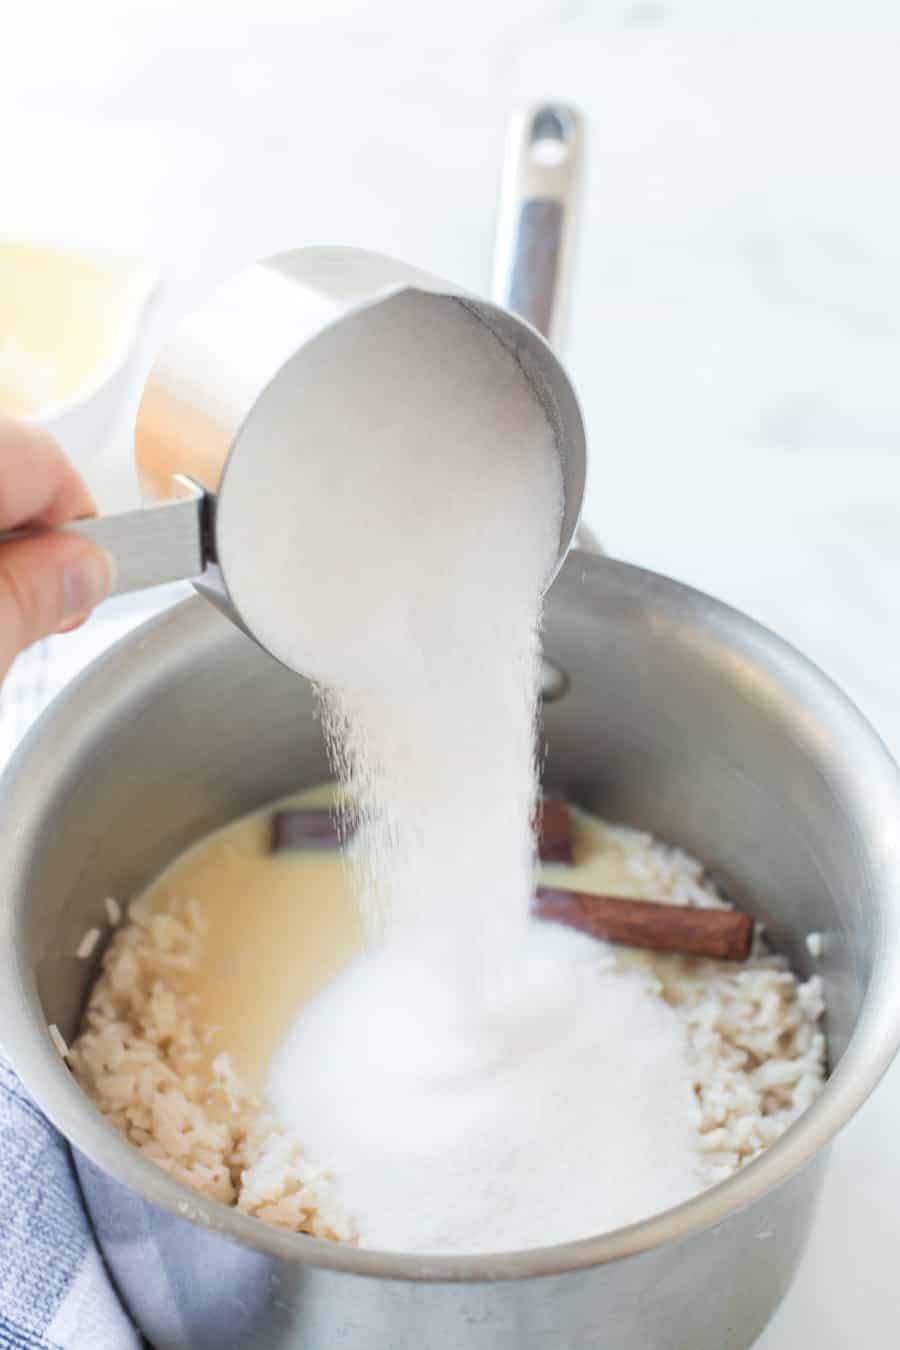 sugar being mixed into the cinnamon and rice pudding mixture.